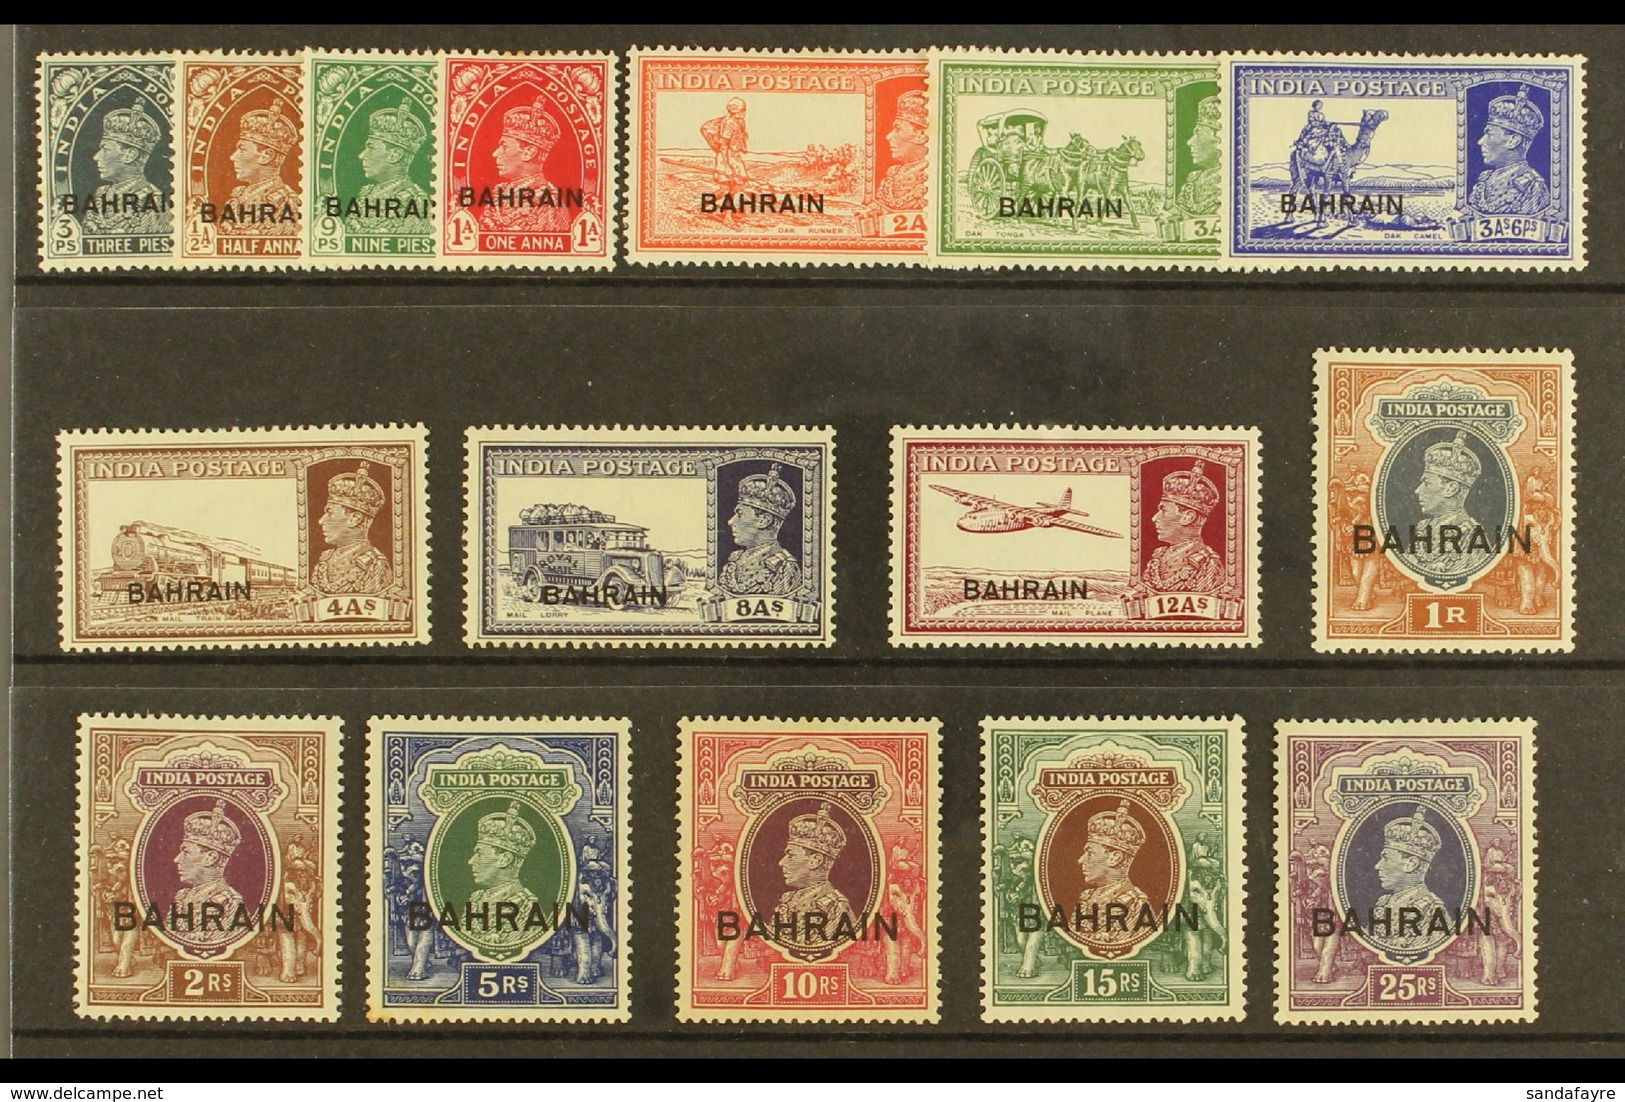 1938 Geo VI Set Complete, SG 20/37, 5r Tones Otherwise Very Fine And Fresh Mint. Scarce Set. (16 Stamps) For More Images - Bahrein (...-1965)